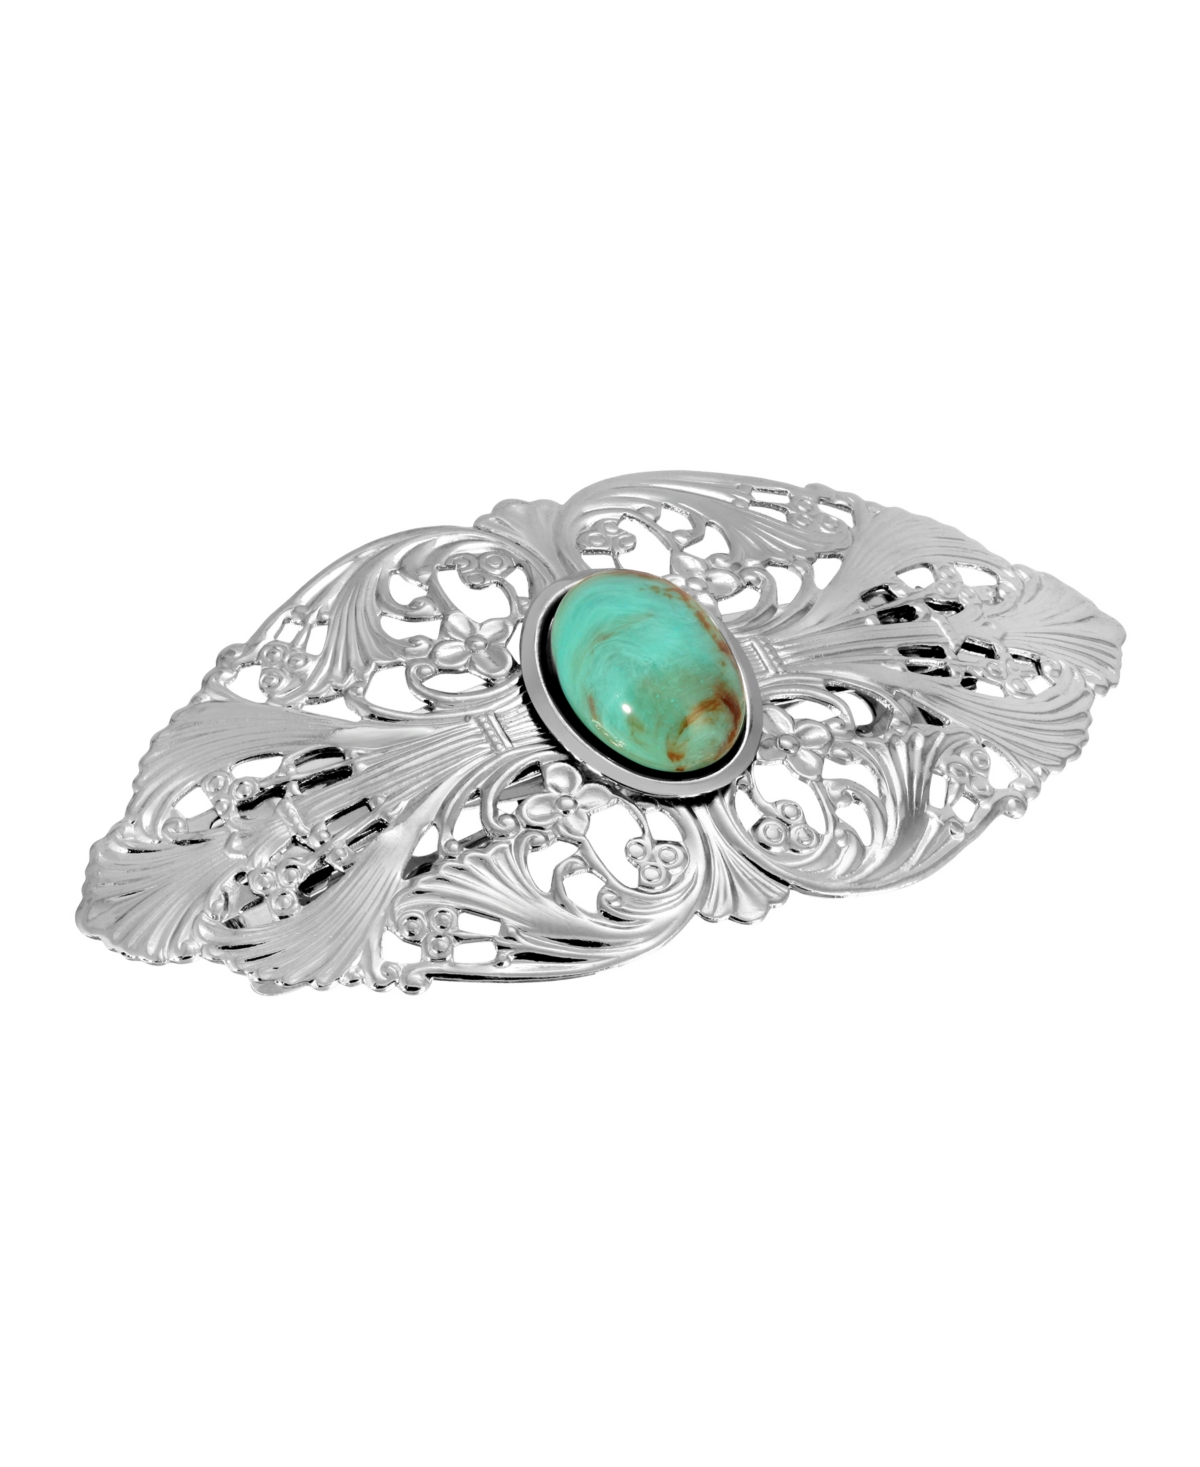 2028 Women's Silver-tone Oval Stone Large Hair Barrette In Turquoise